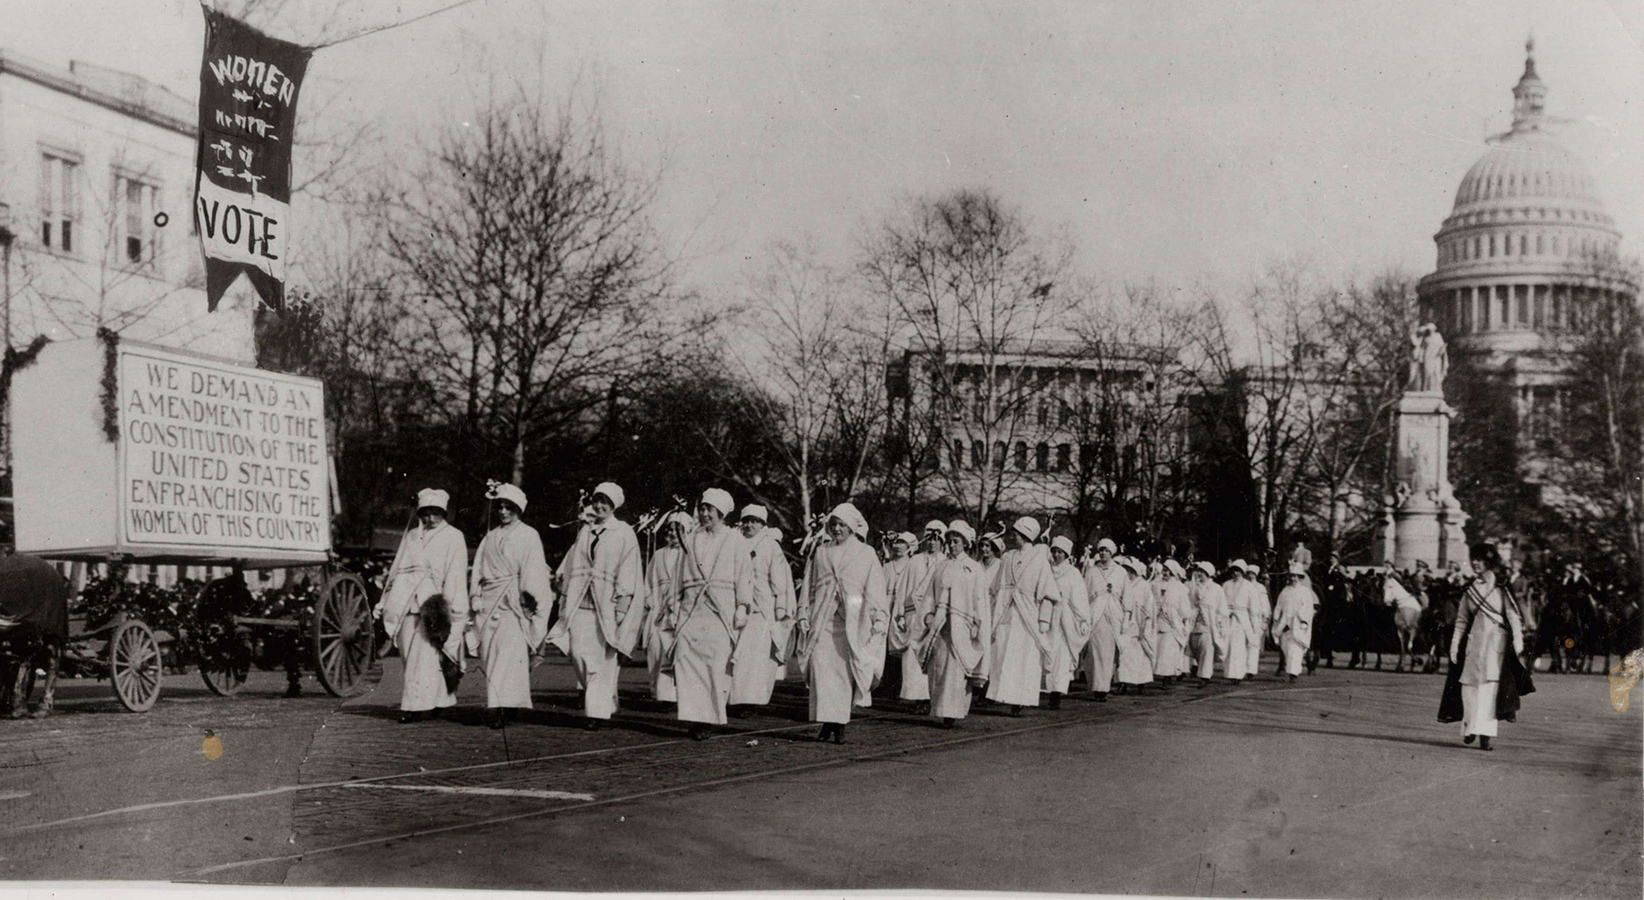 omen Marching in Suffragette Parade, Washington, DC; 3/3/1913